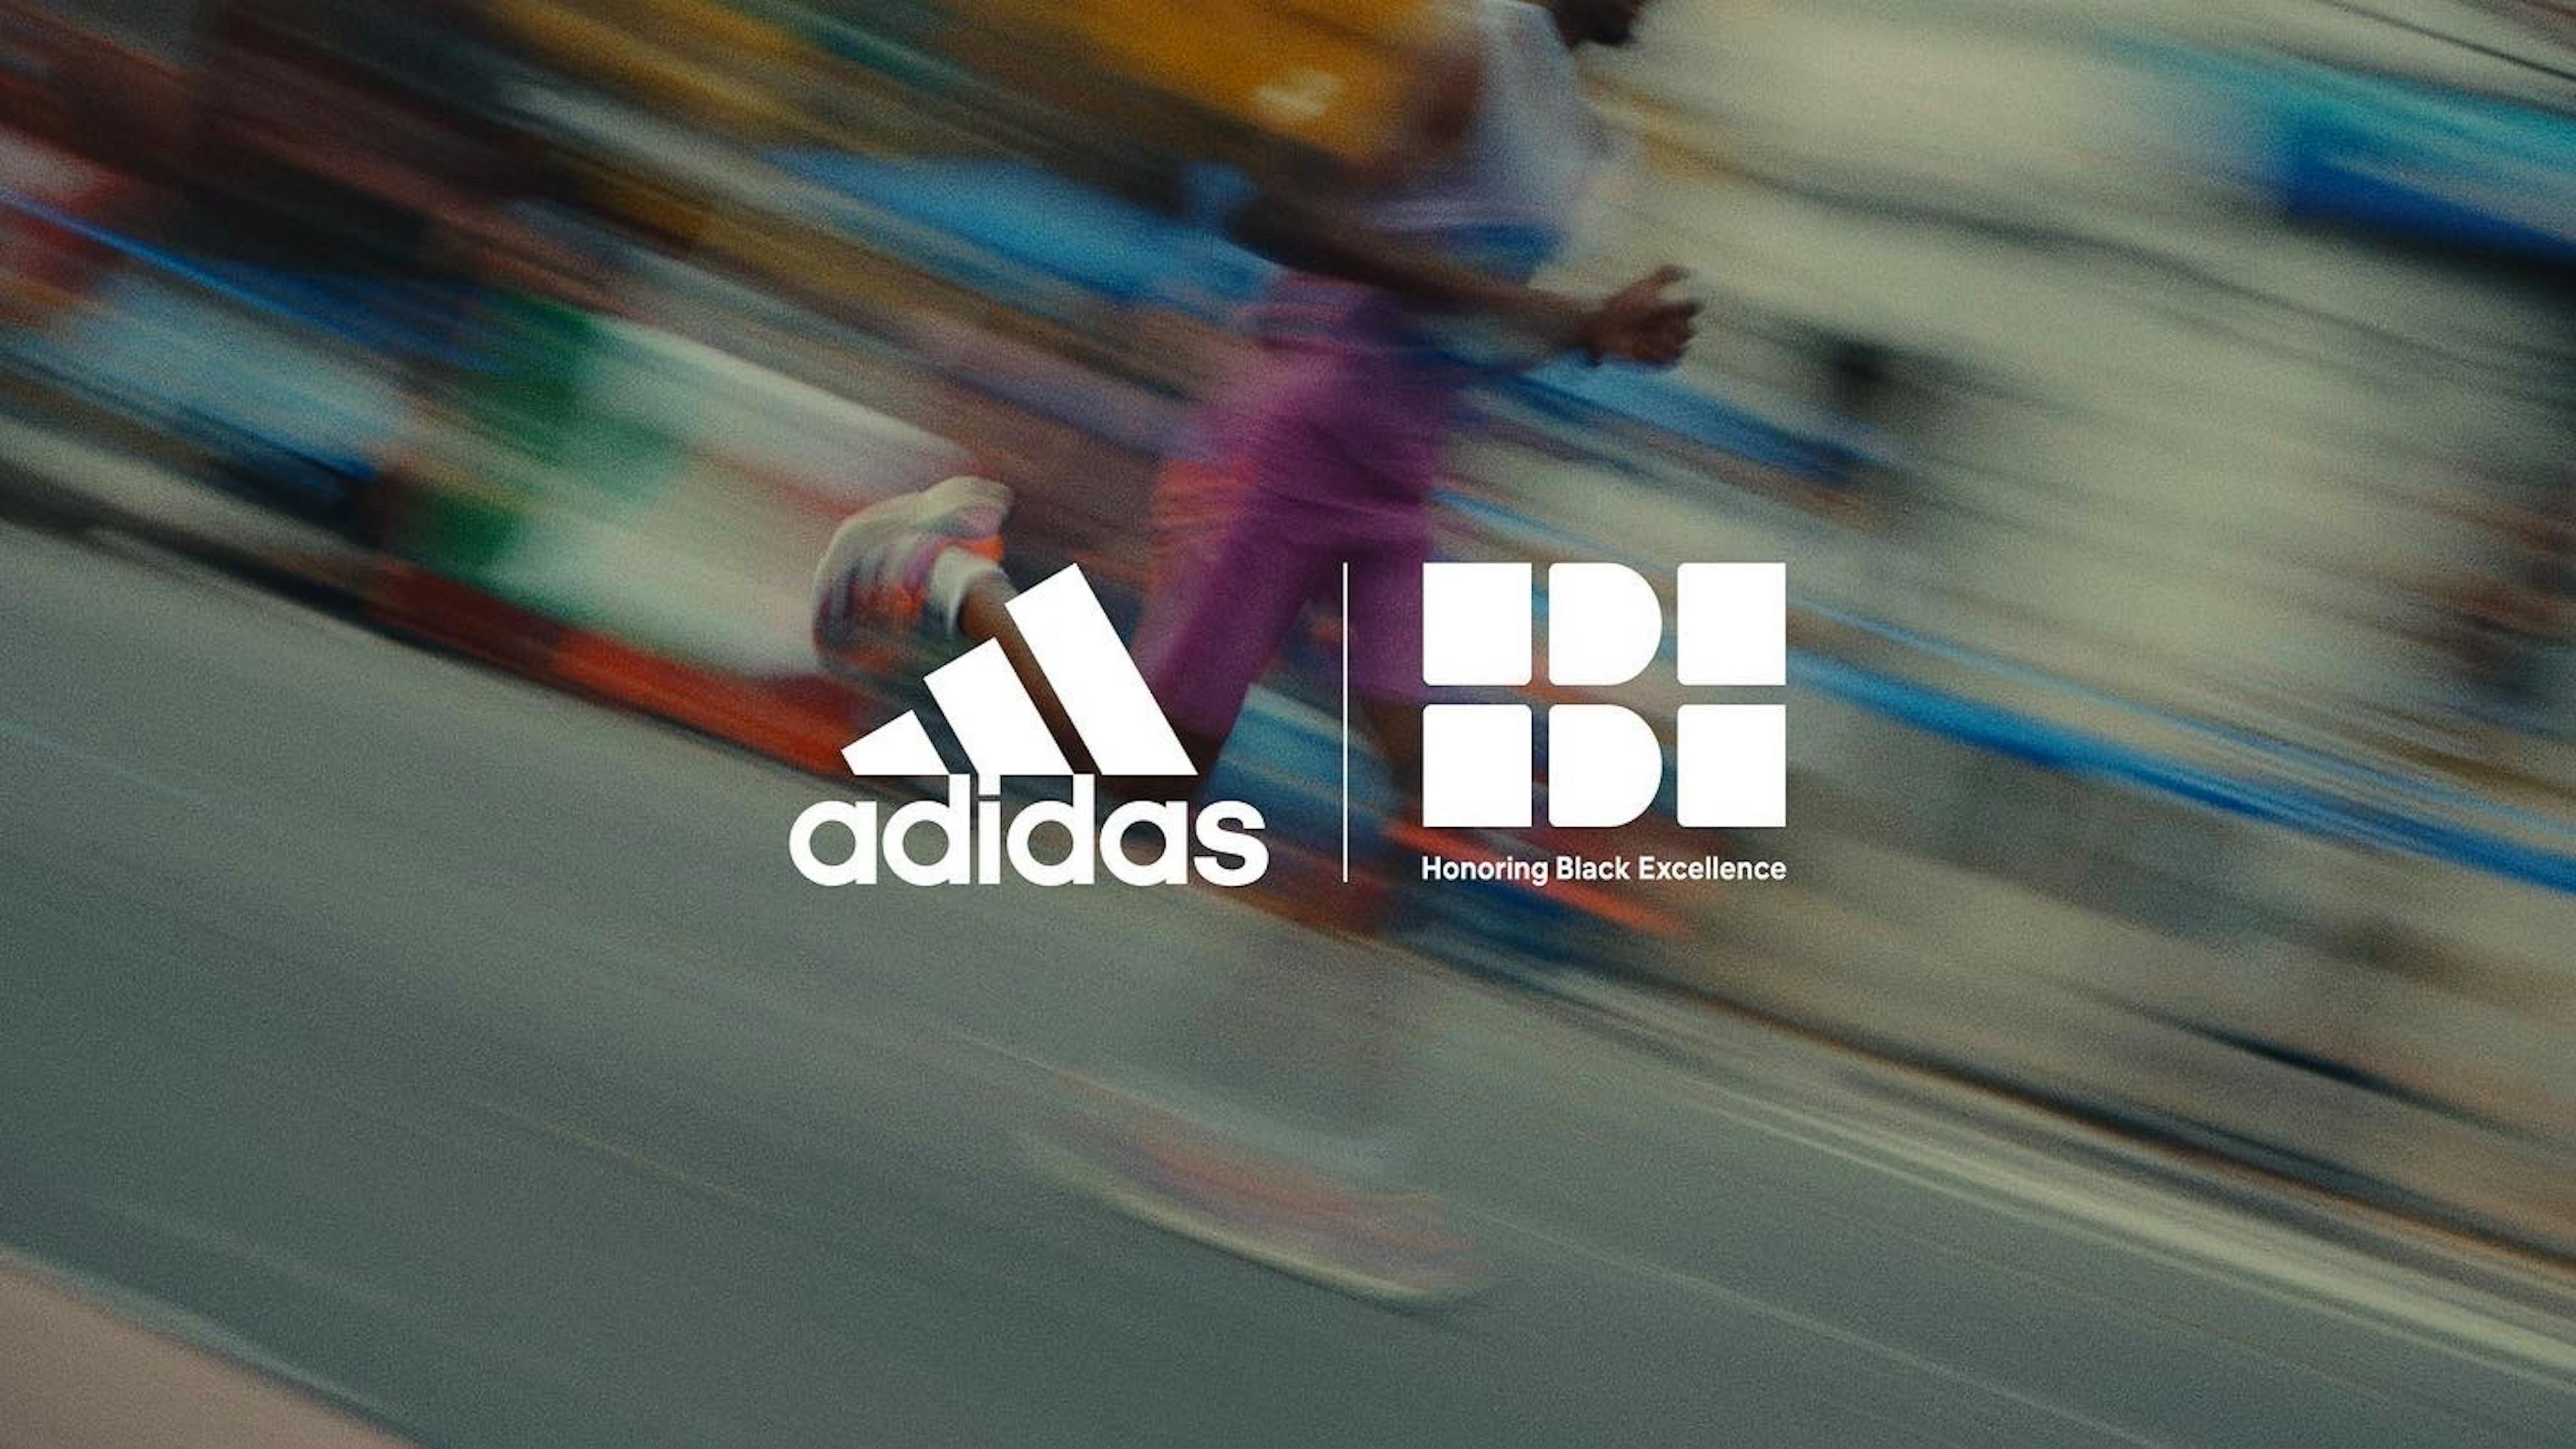 This image features a promotional graphic for Adidas with a focus on speed and motion. In the foreground, a blurred image of a runner in mid-stride conveys swift movement, dressed in vibrant pink athletic wear and white Adidas sneakers. The background is a streak of colors, suggesting the runner is passing by quickly. The Adidas logo is prominently displayed on the left, paired with the 'Honoring Black Excellence' statement on the right, implying a celebration of athletic achievements within the Black community.